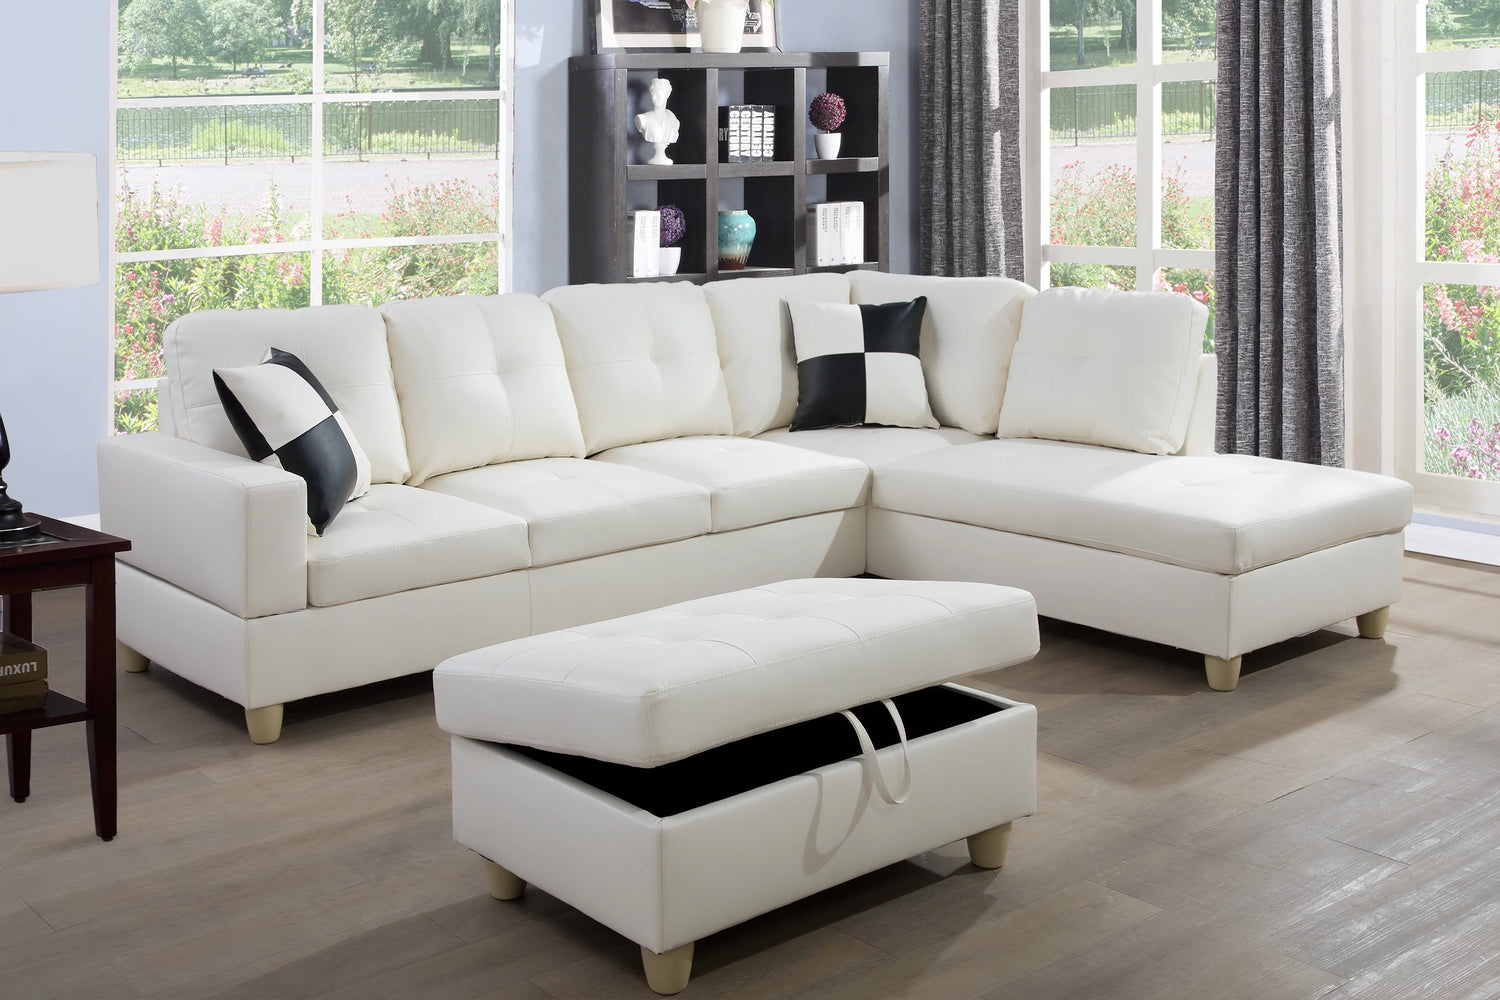 A spacious, bright living room features a white sectional sofa with black accent pillows. In the foreground, there is a matching white ottoman with storage and an open lid. Large windows with gray curtains allow natural light to flood the room, highlighting wooden floors.